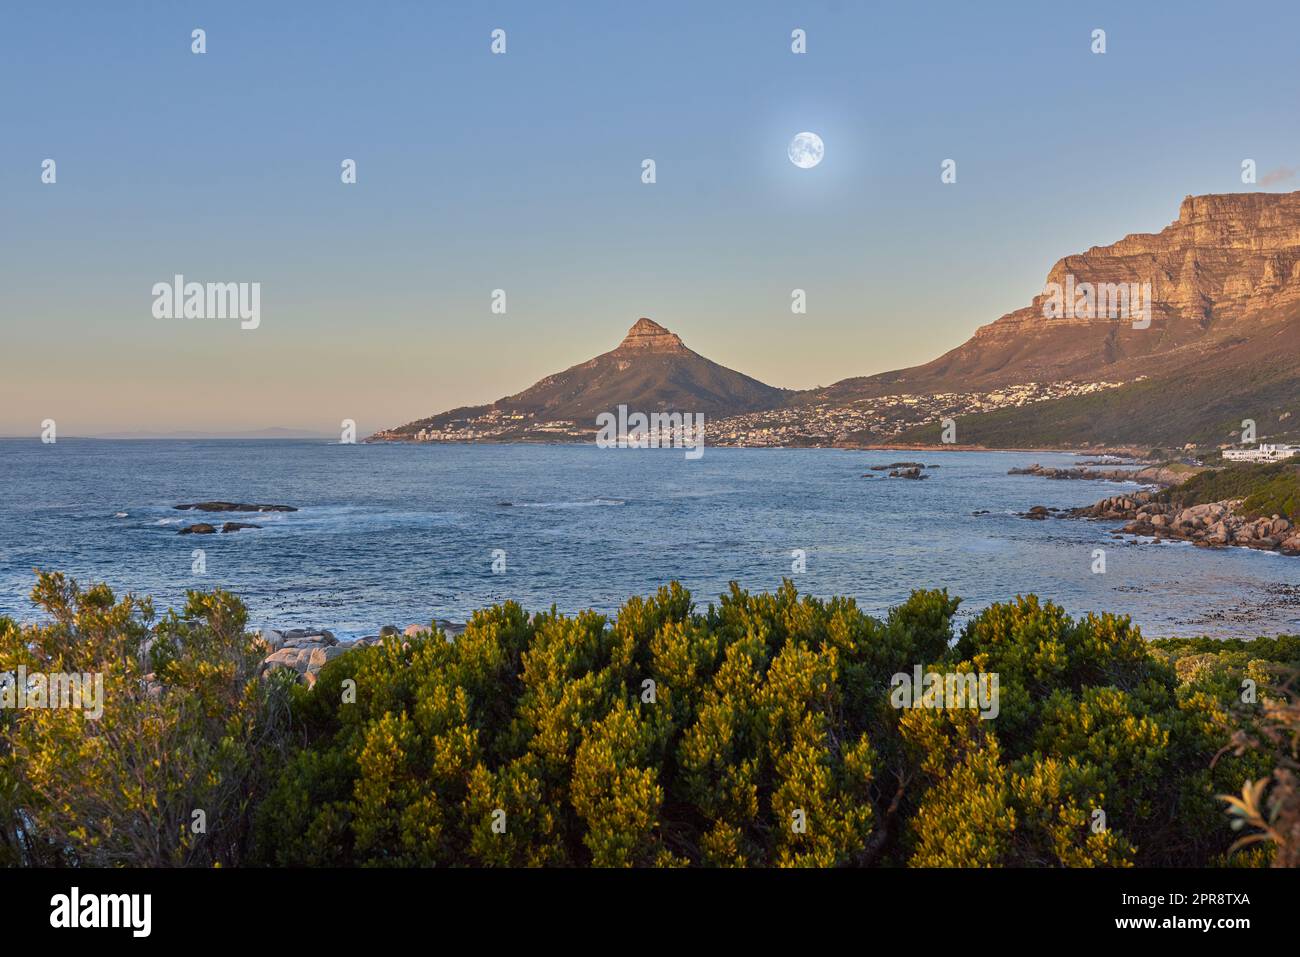 Lush plants in nature with the ocean and mountain in background against blue sky with a full moon. Scenic popular natural landmark and tourist attraction for adventure while on vacation in Cape Town Stock Photo